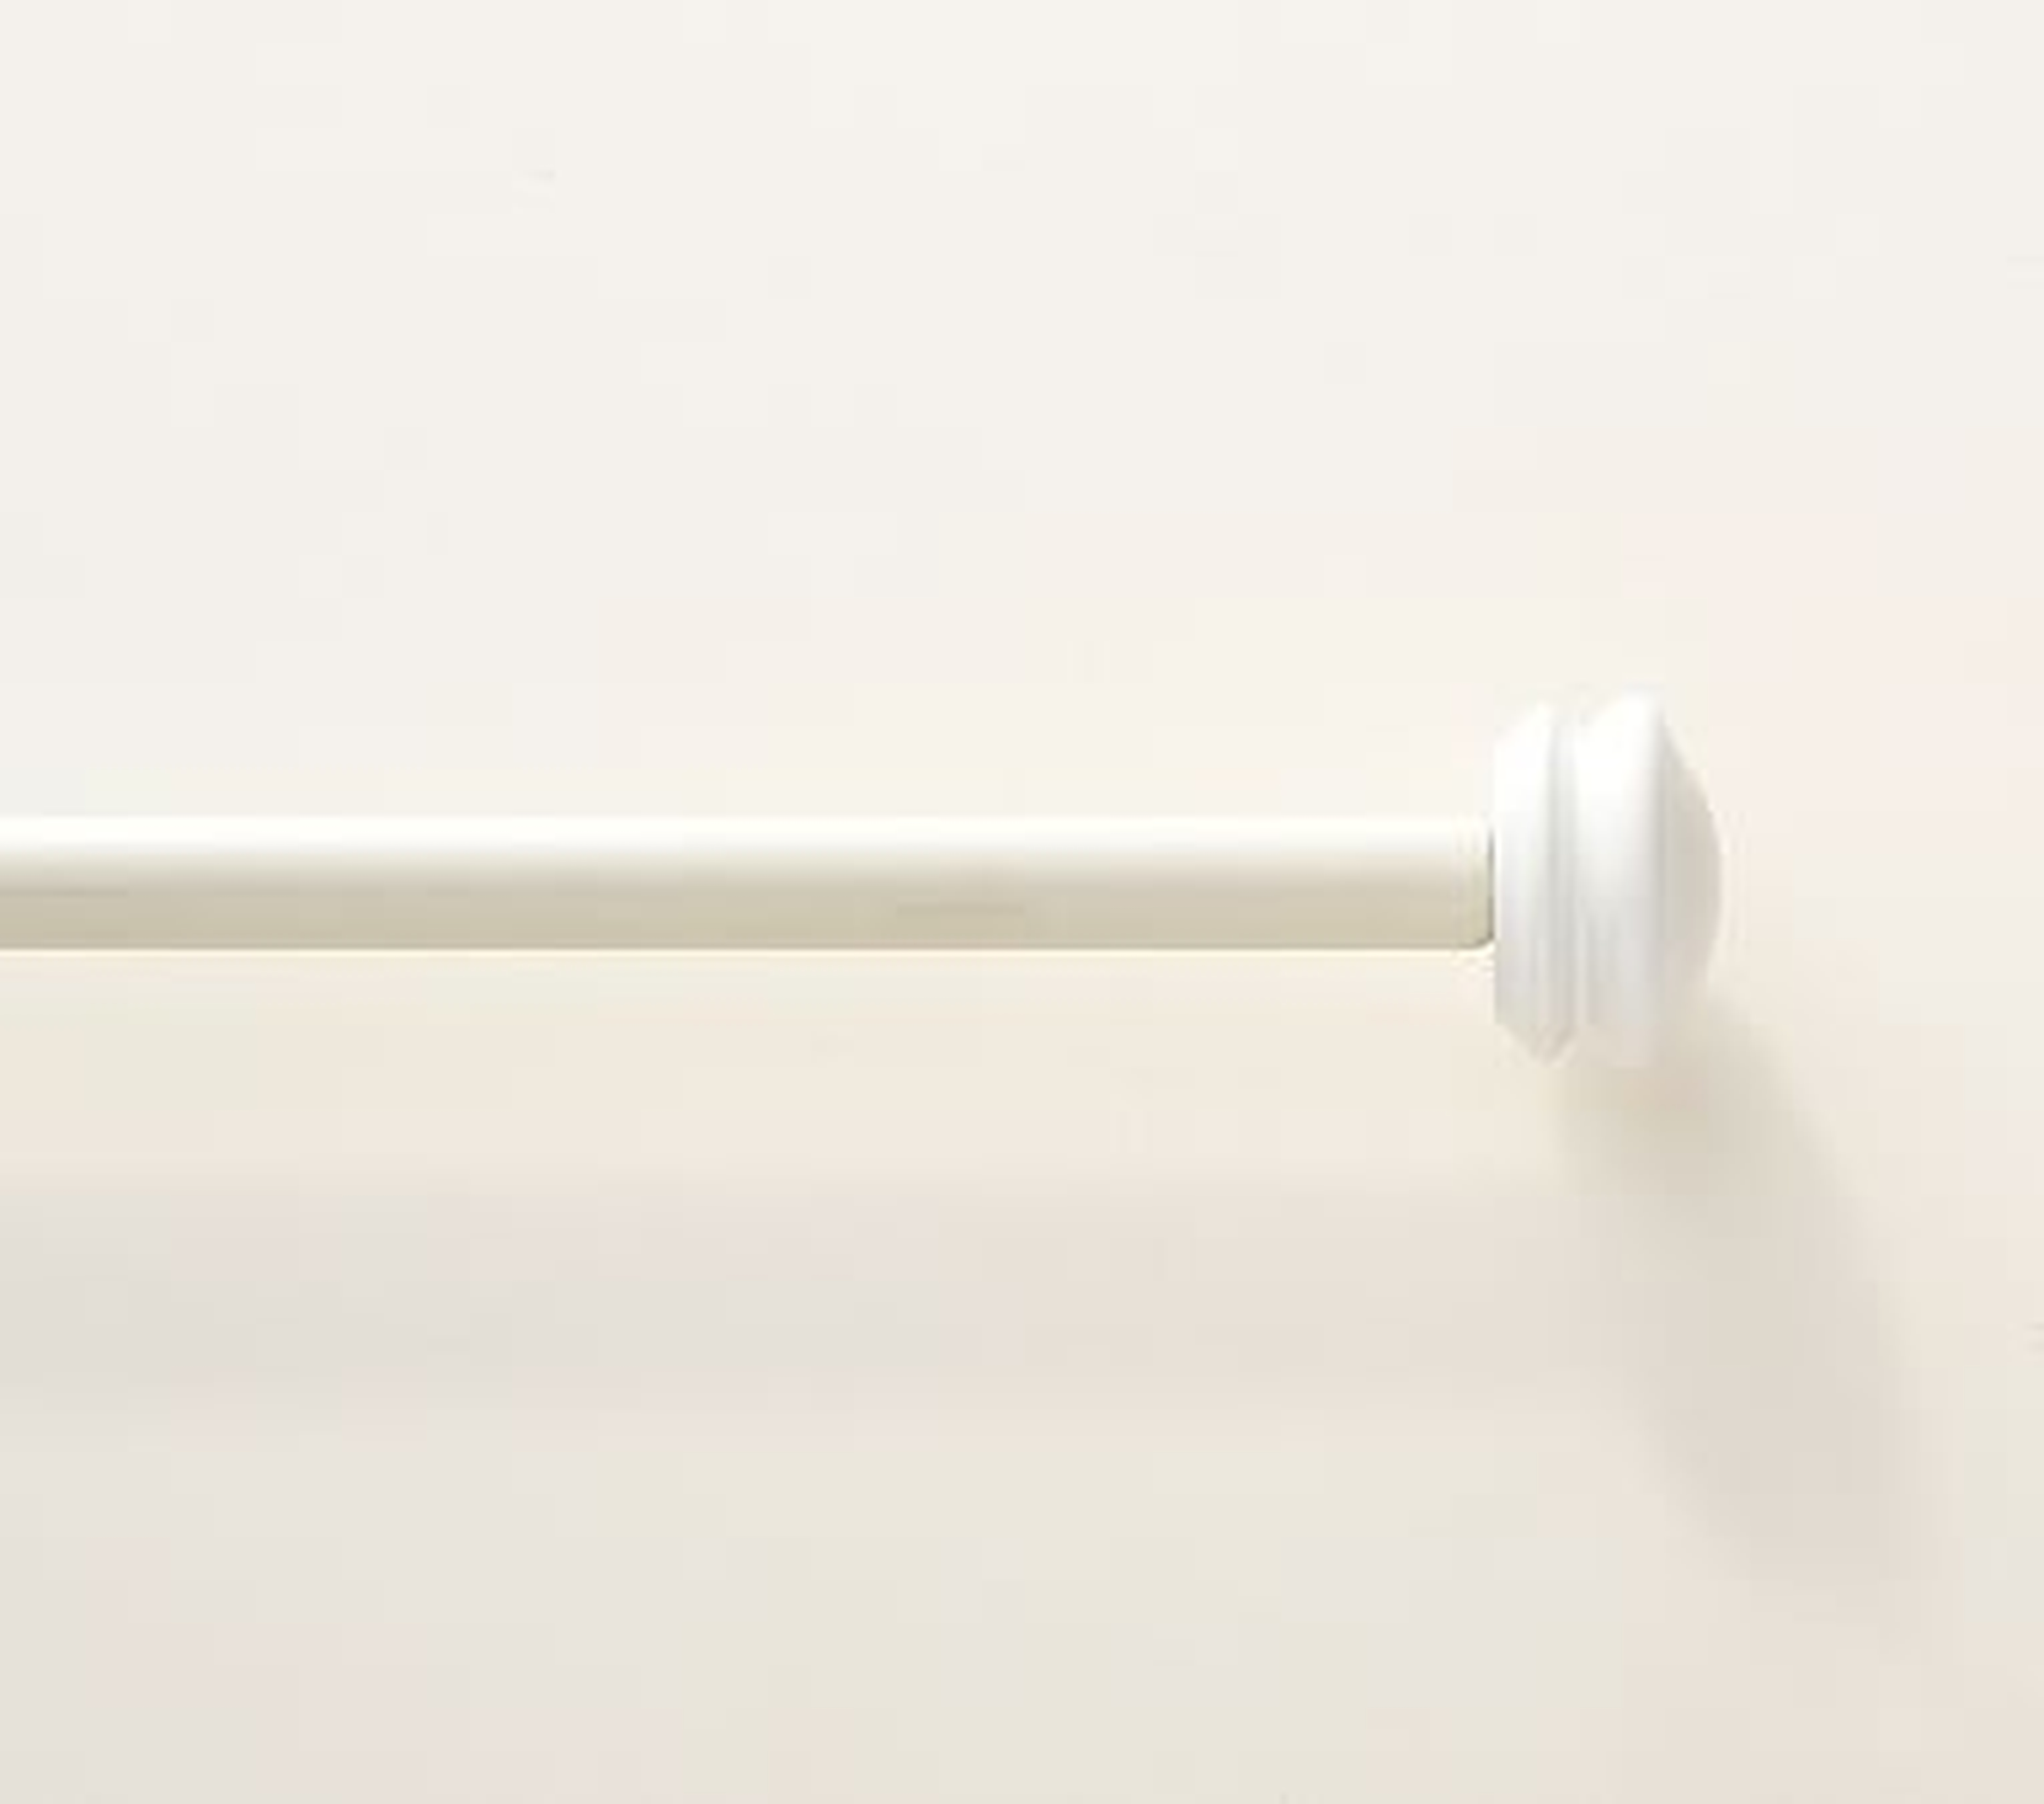 Metal Rod, 60-108 Inches, White - Pottery Barn Kids